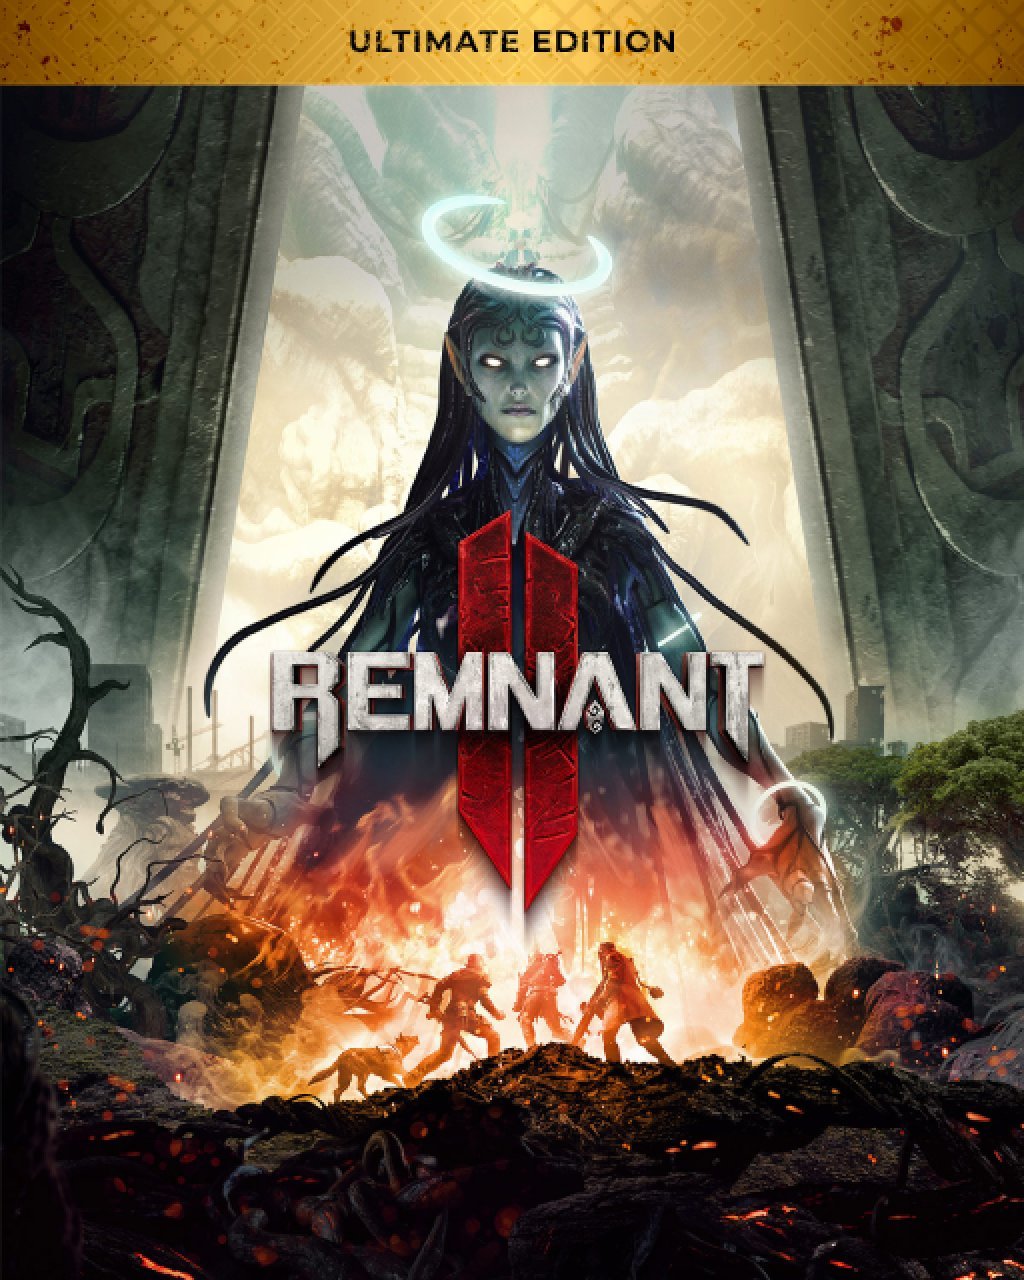 Remnant II Ultimate Edition